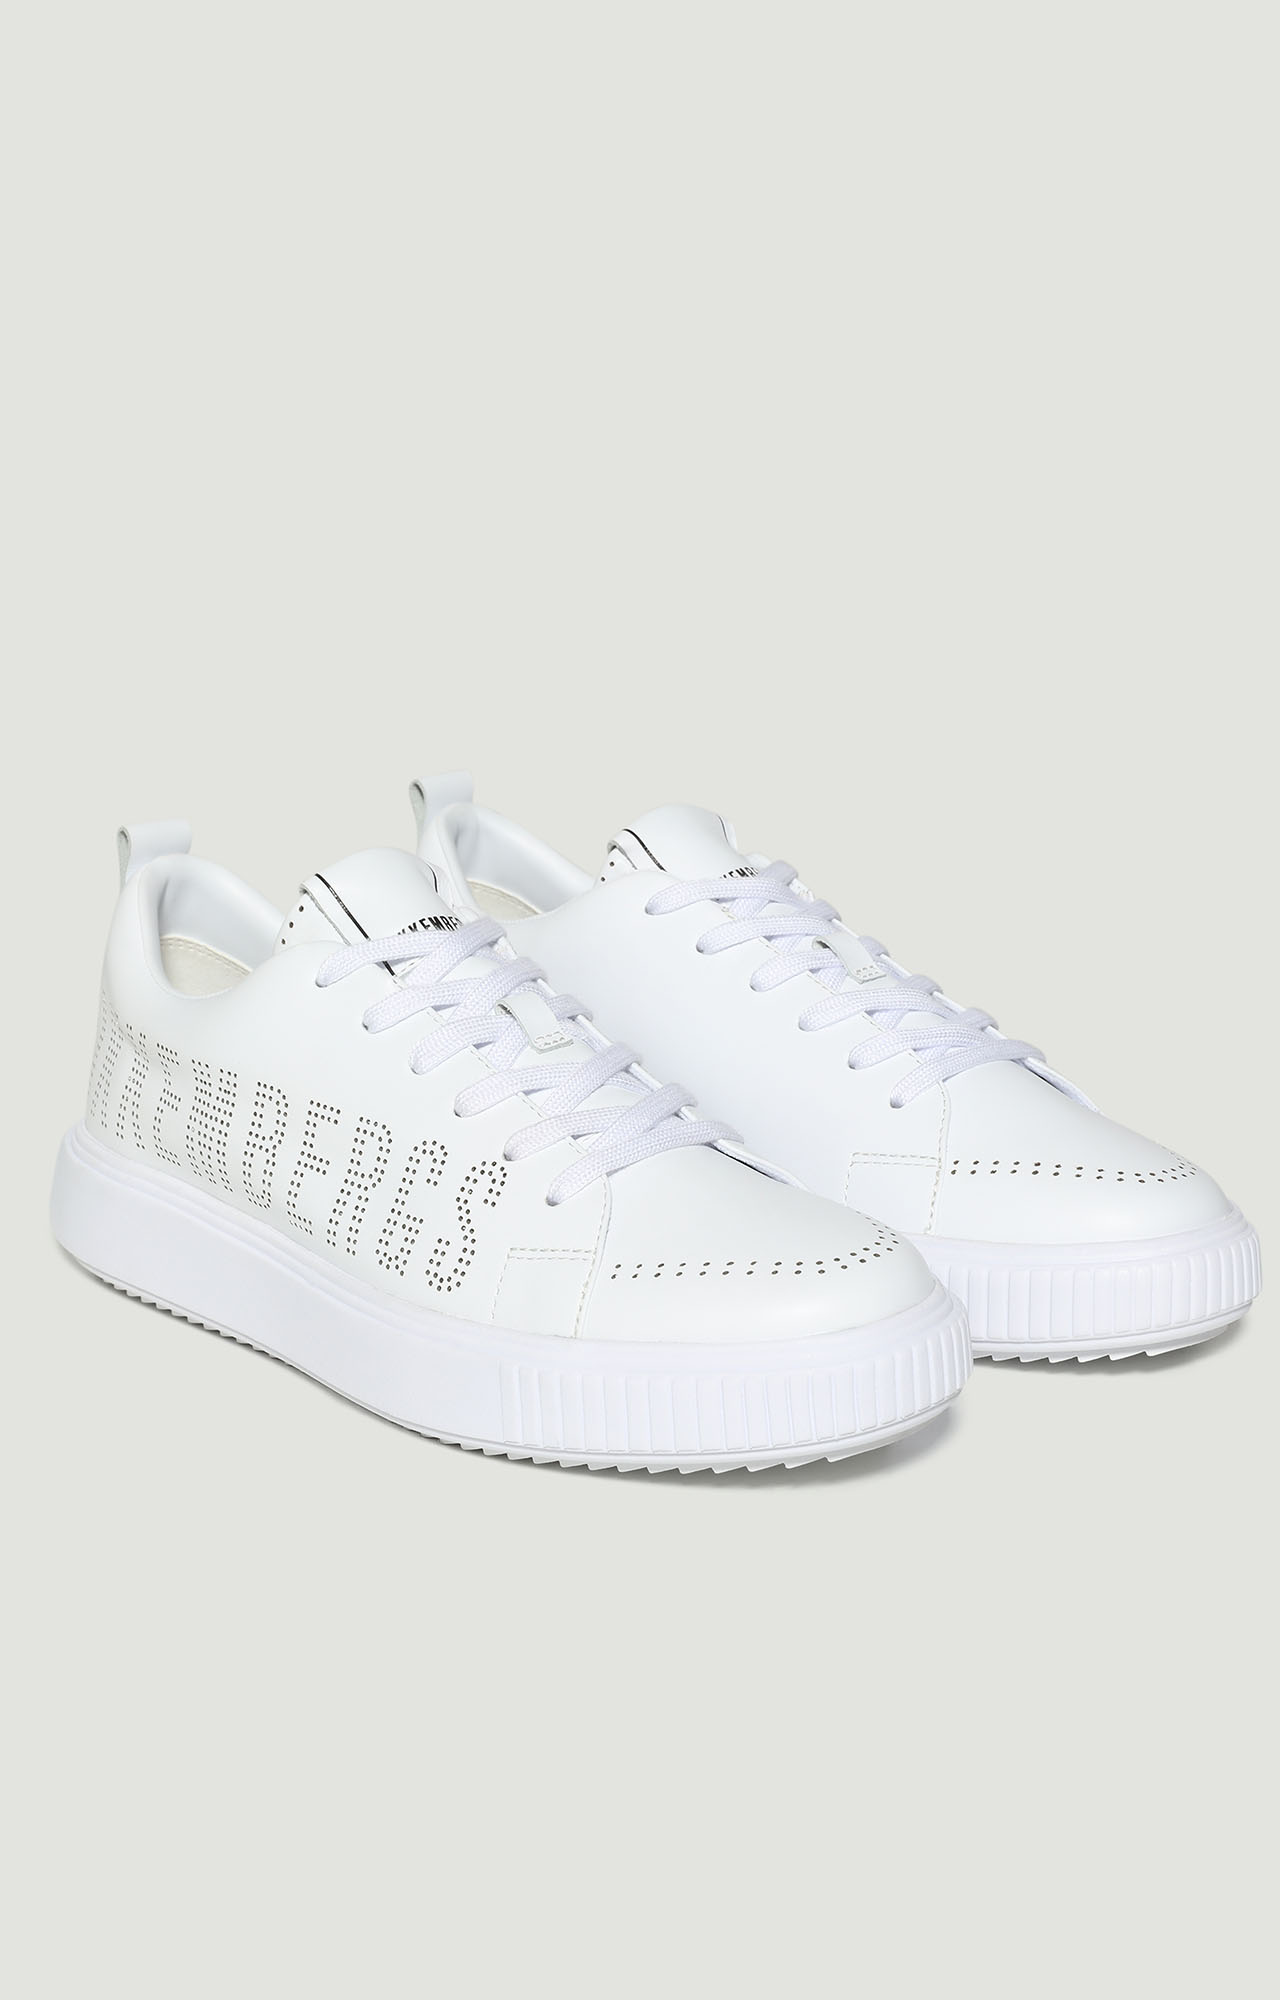 Men's sneakers Casio with perforated details | WHITE | Bikkembergs